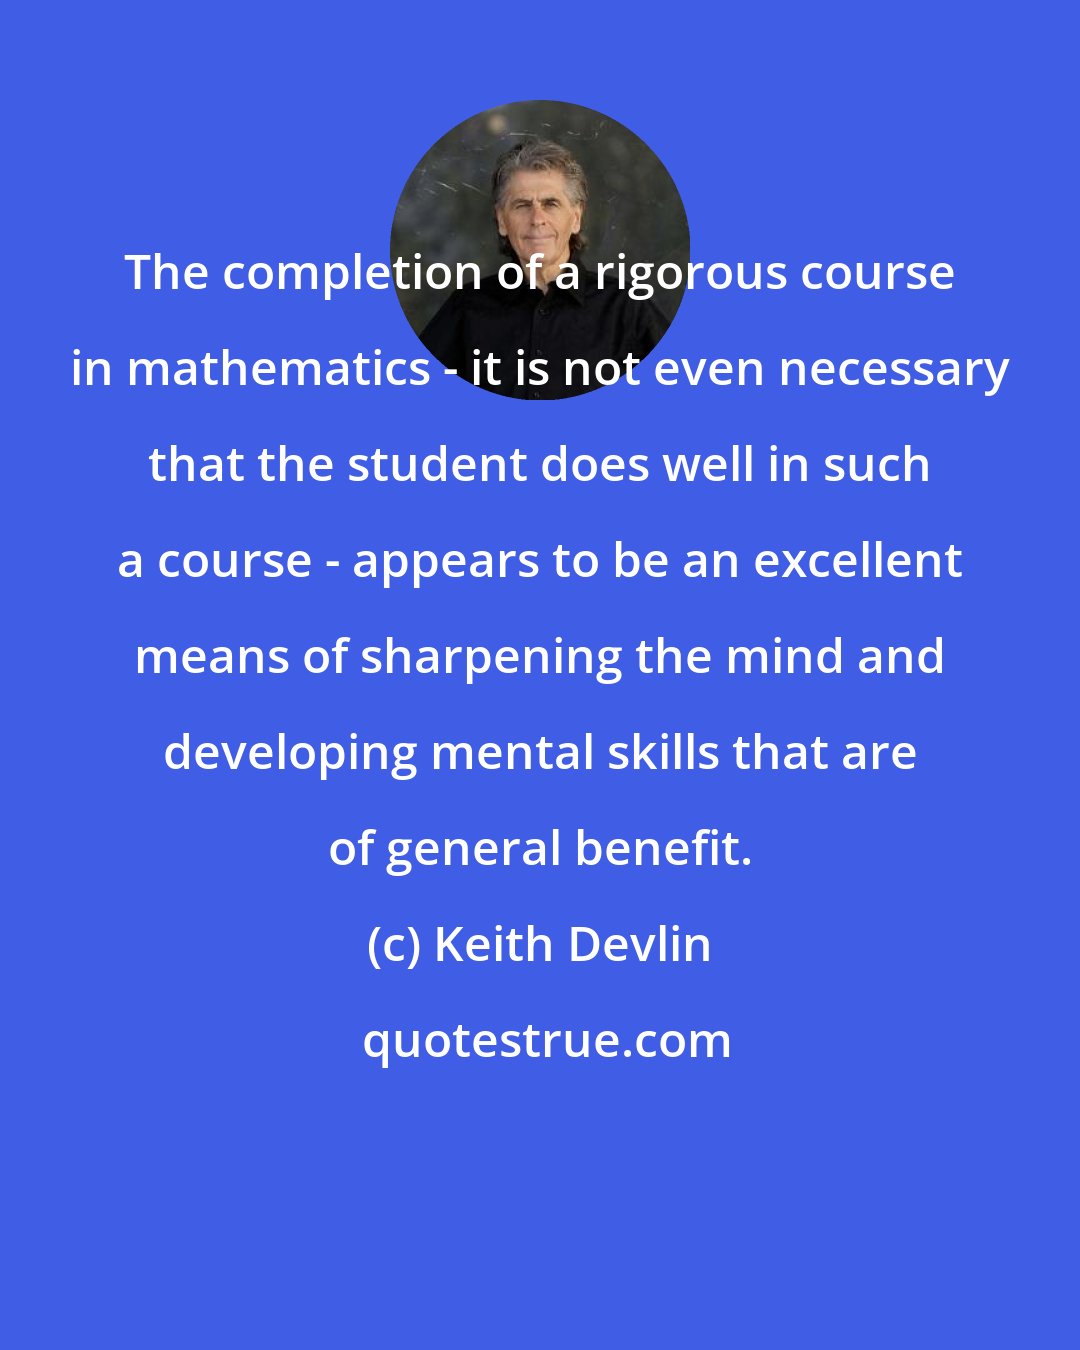 Keith Devlin: The completion of a rigorous course in mathematics - it is not even necessary that the student does well in such a course - appears to be an excellent means of sharpening the mind and developing mental skills that are of general benefit.